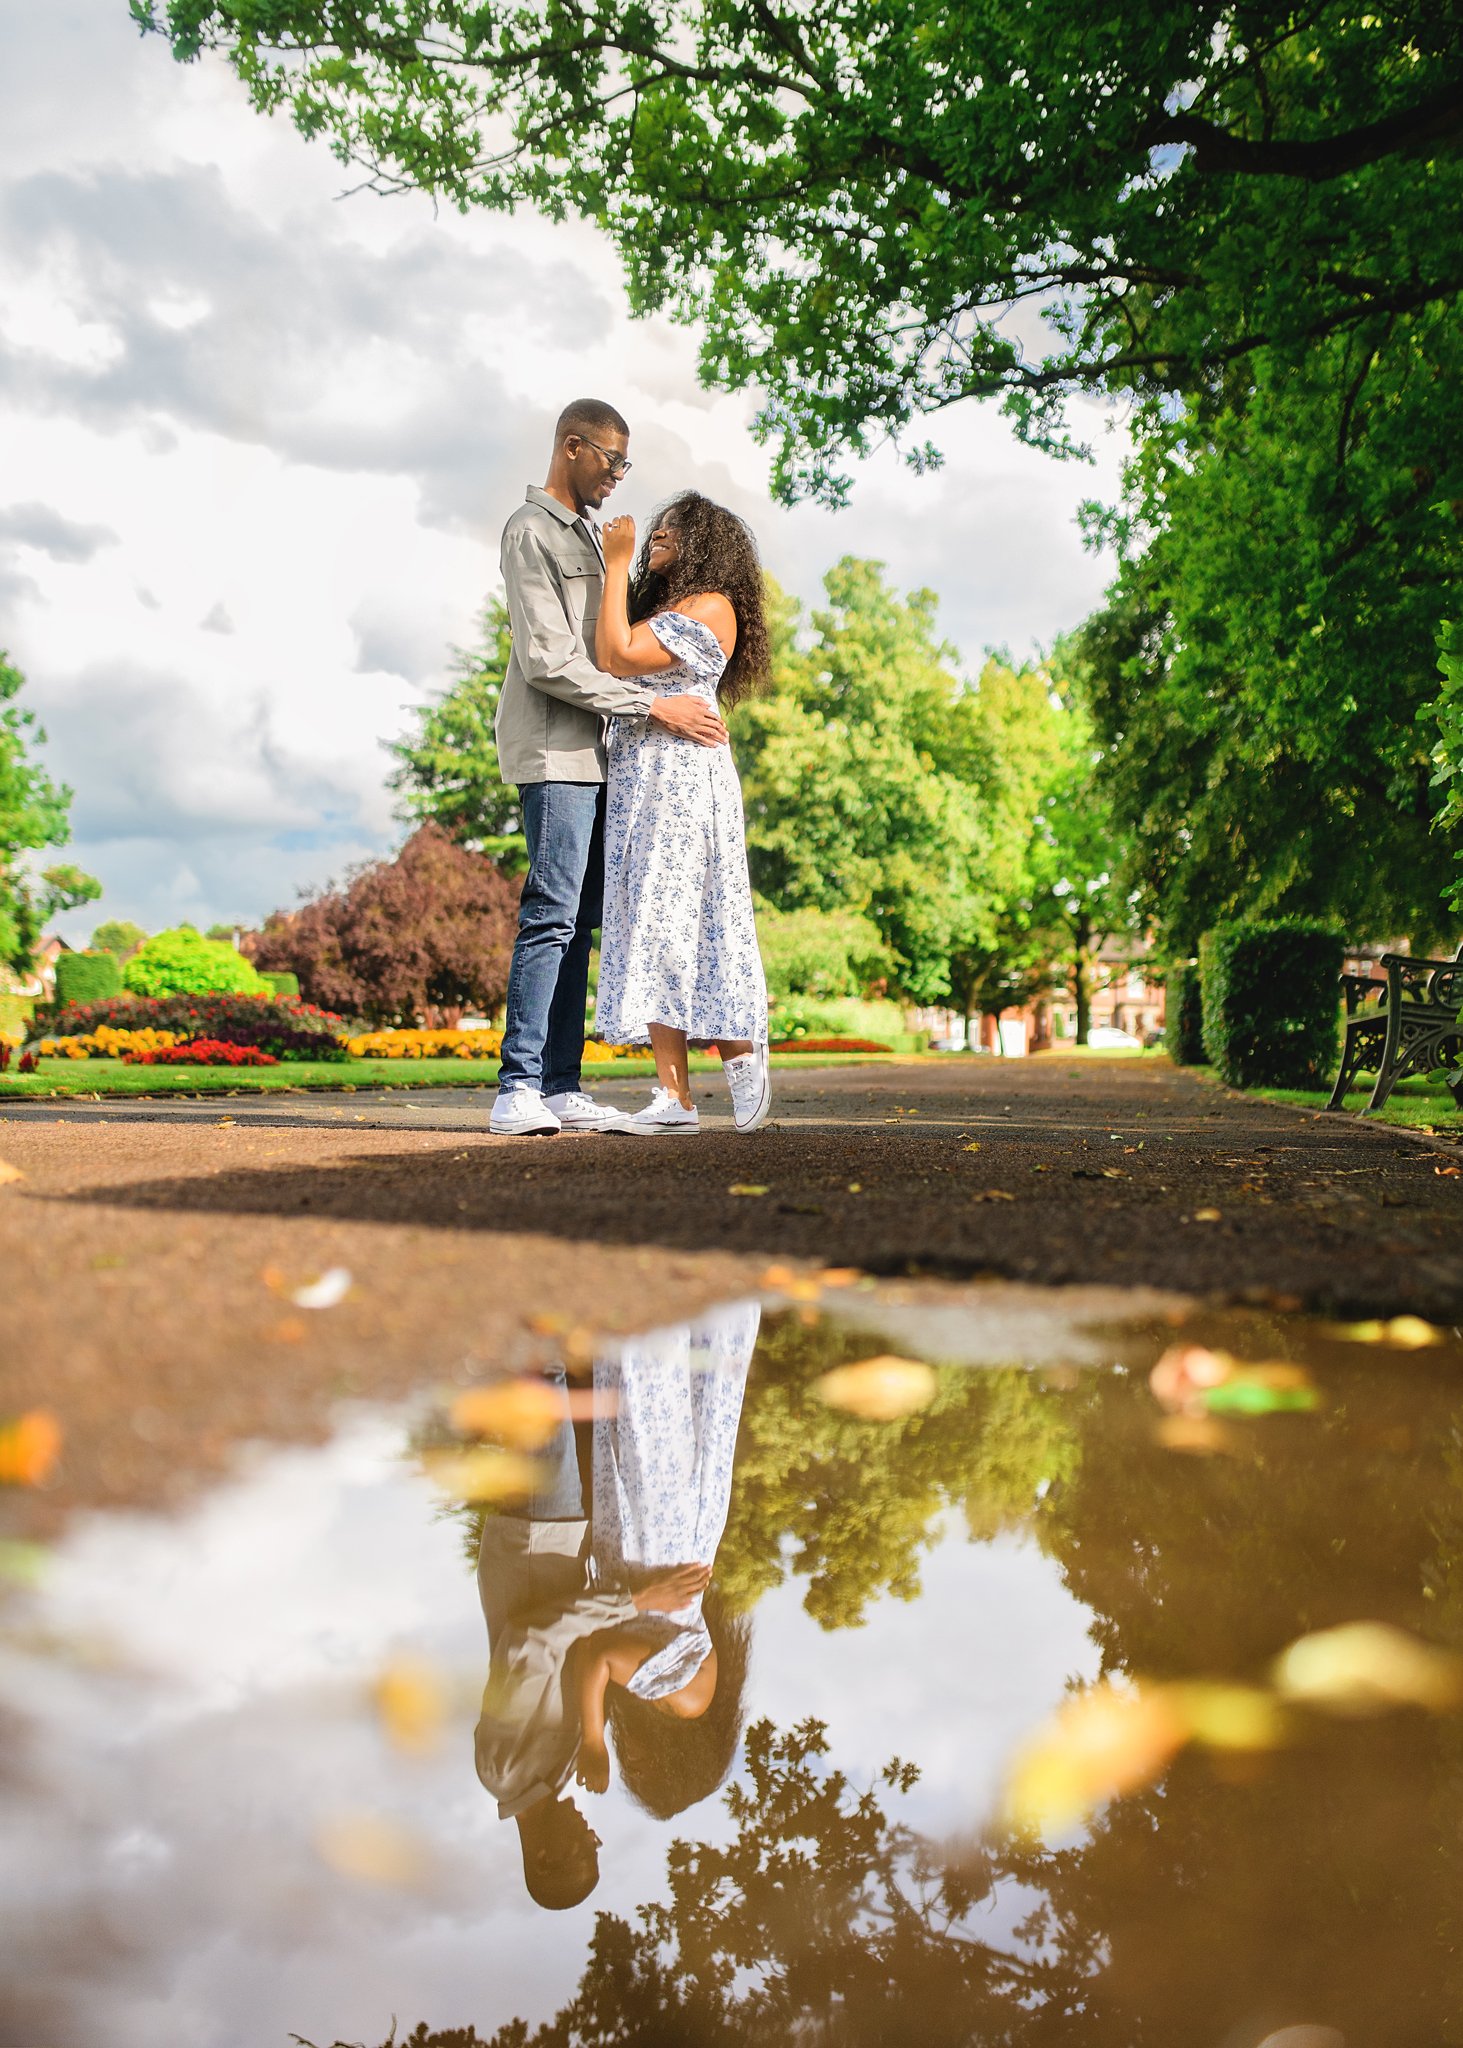 Engaged couple embracing by a reflective water puddle in Nottingham, with the garden's beauty mirrored in the water